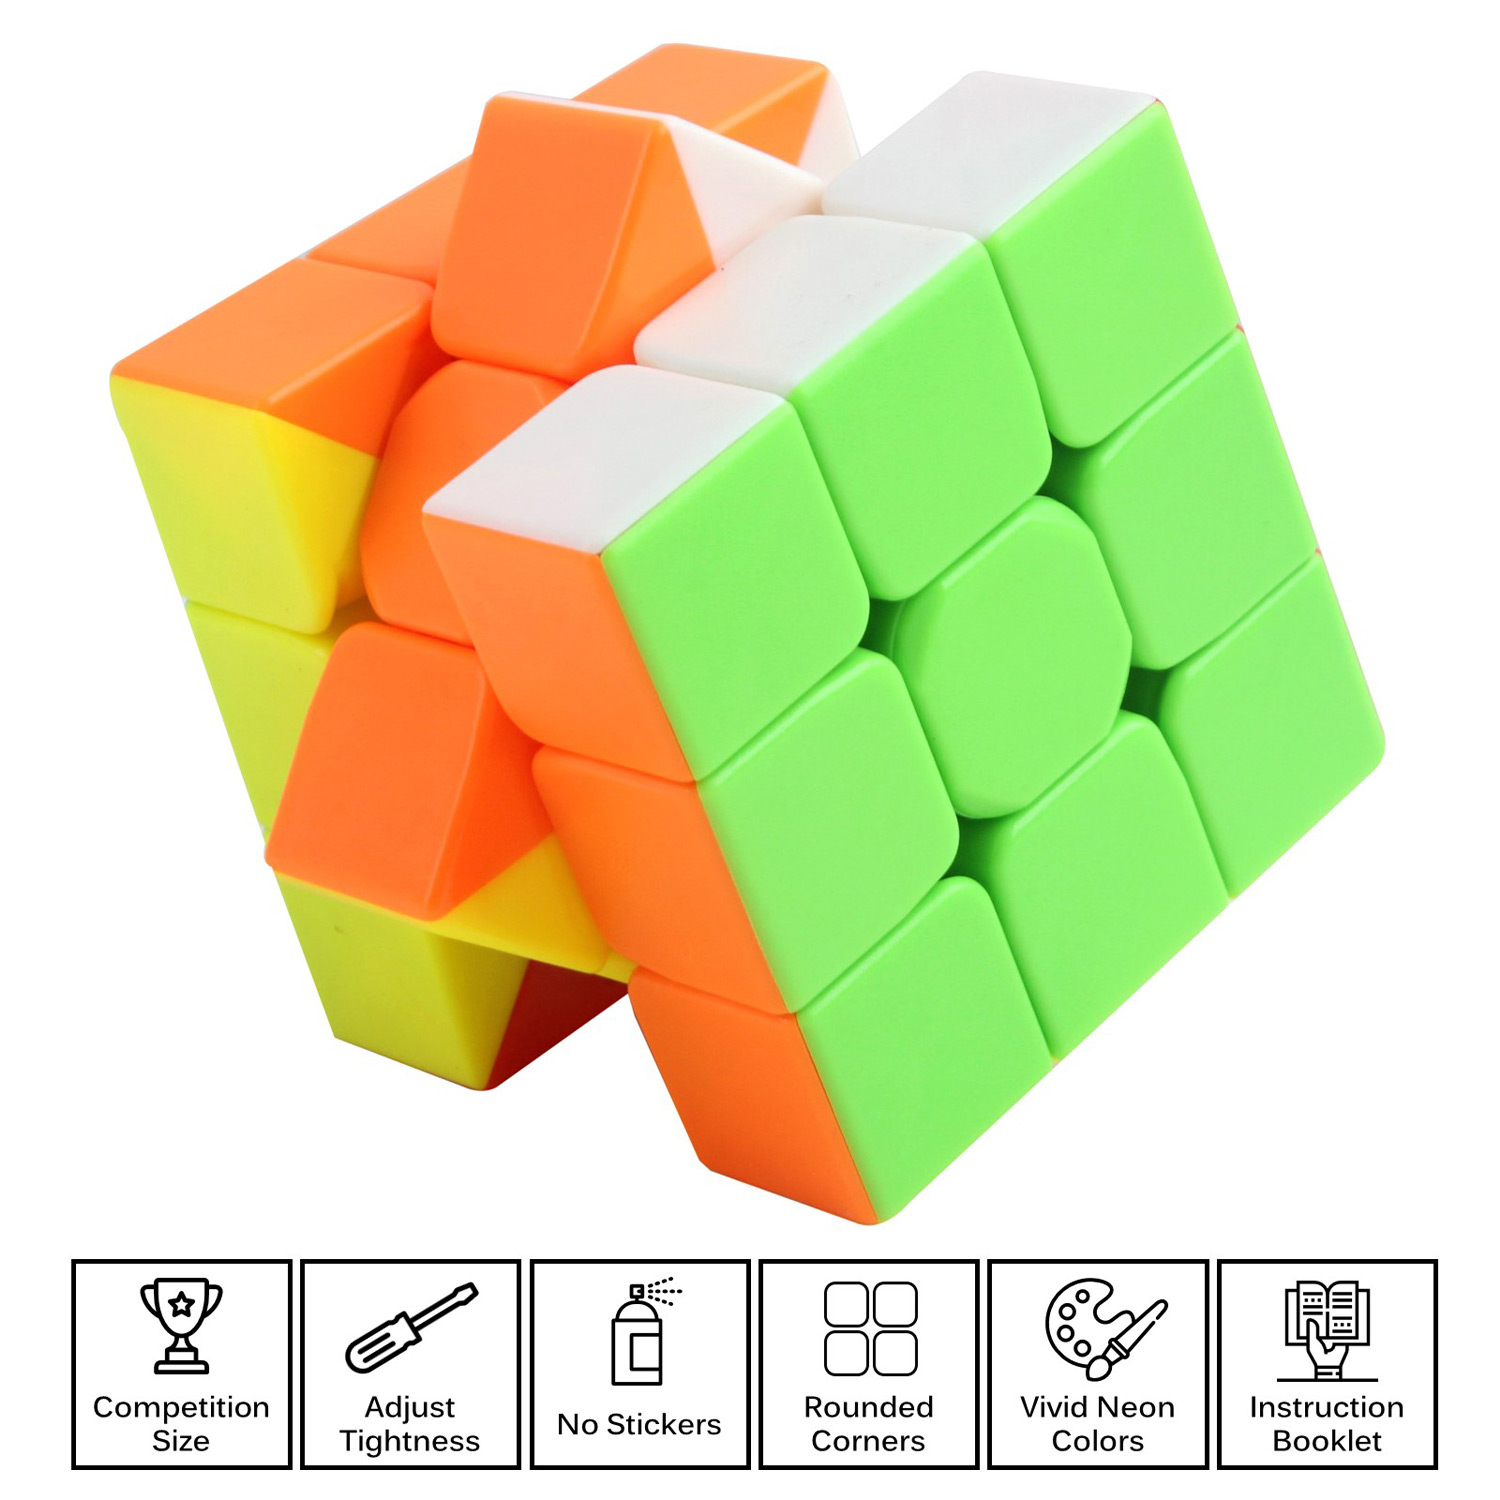 Speed Cube Turns Quick Smooth Play Solid Durable Stickerless Smart Gaming Puzzle Modern Colors IQ Tester Magic Anti Stress Anti-anxiety Adults Kids Brain Teaser Toy